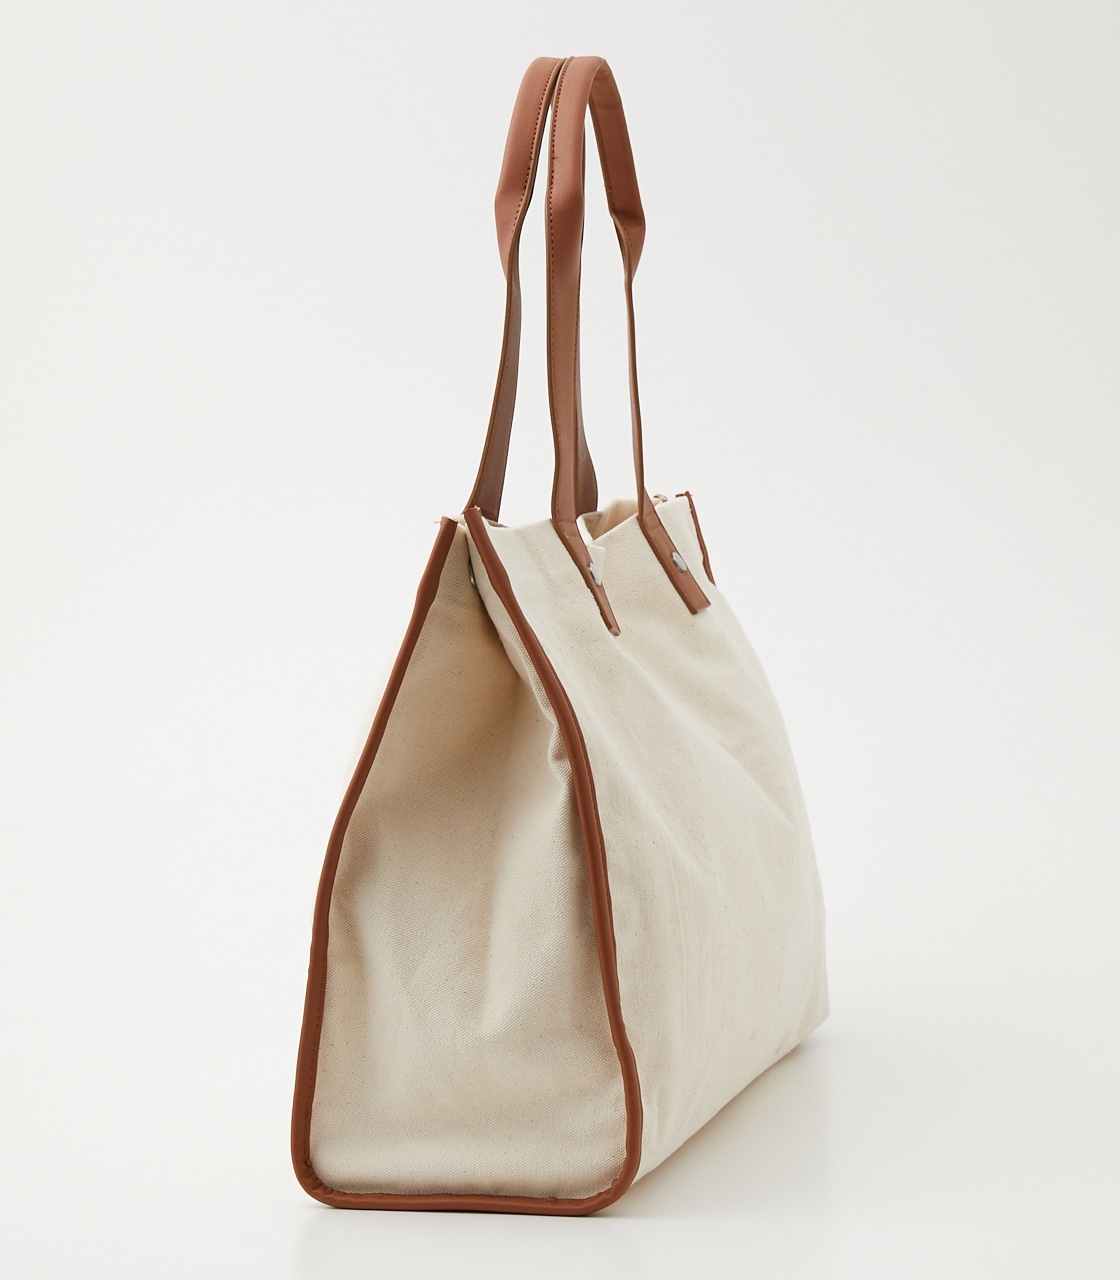 LINEN LIKE BIG TOTE BAG/リネンライクビッグトートバッグ 詳細画像 柄CAM 3